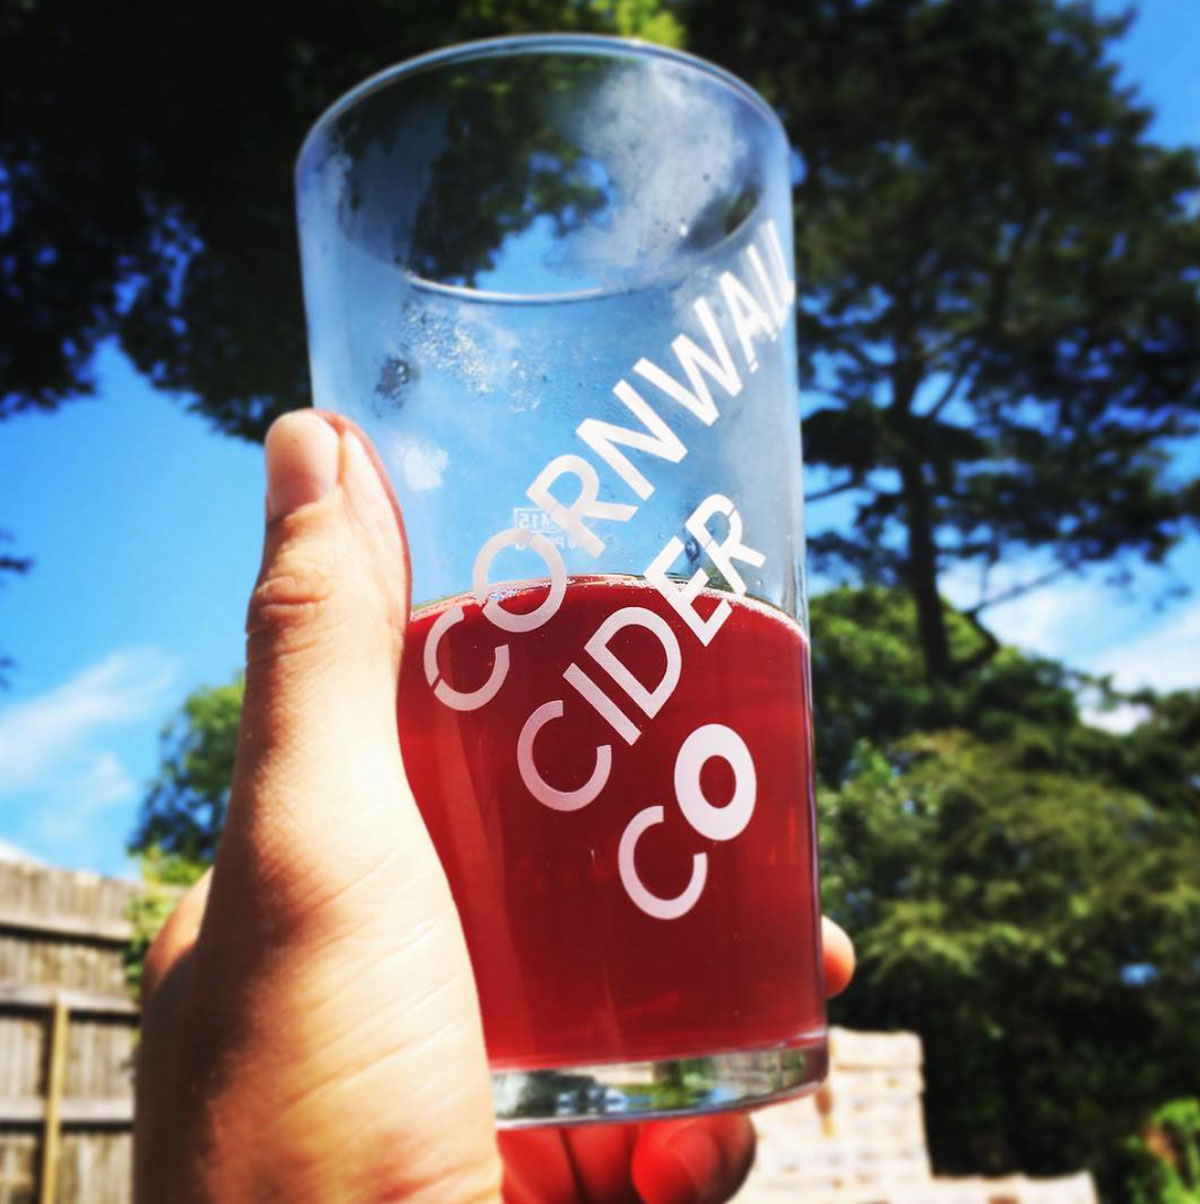 cornwall-cider-co-square-gallery-01.jpg